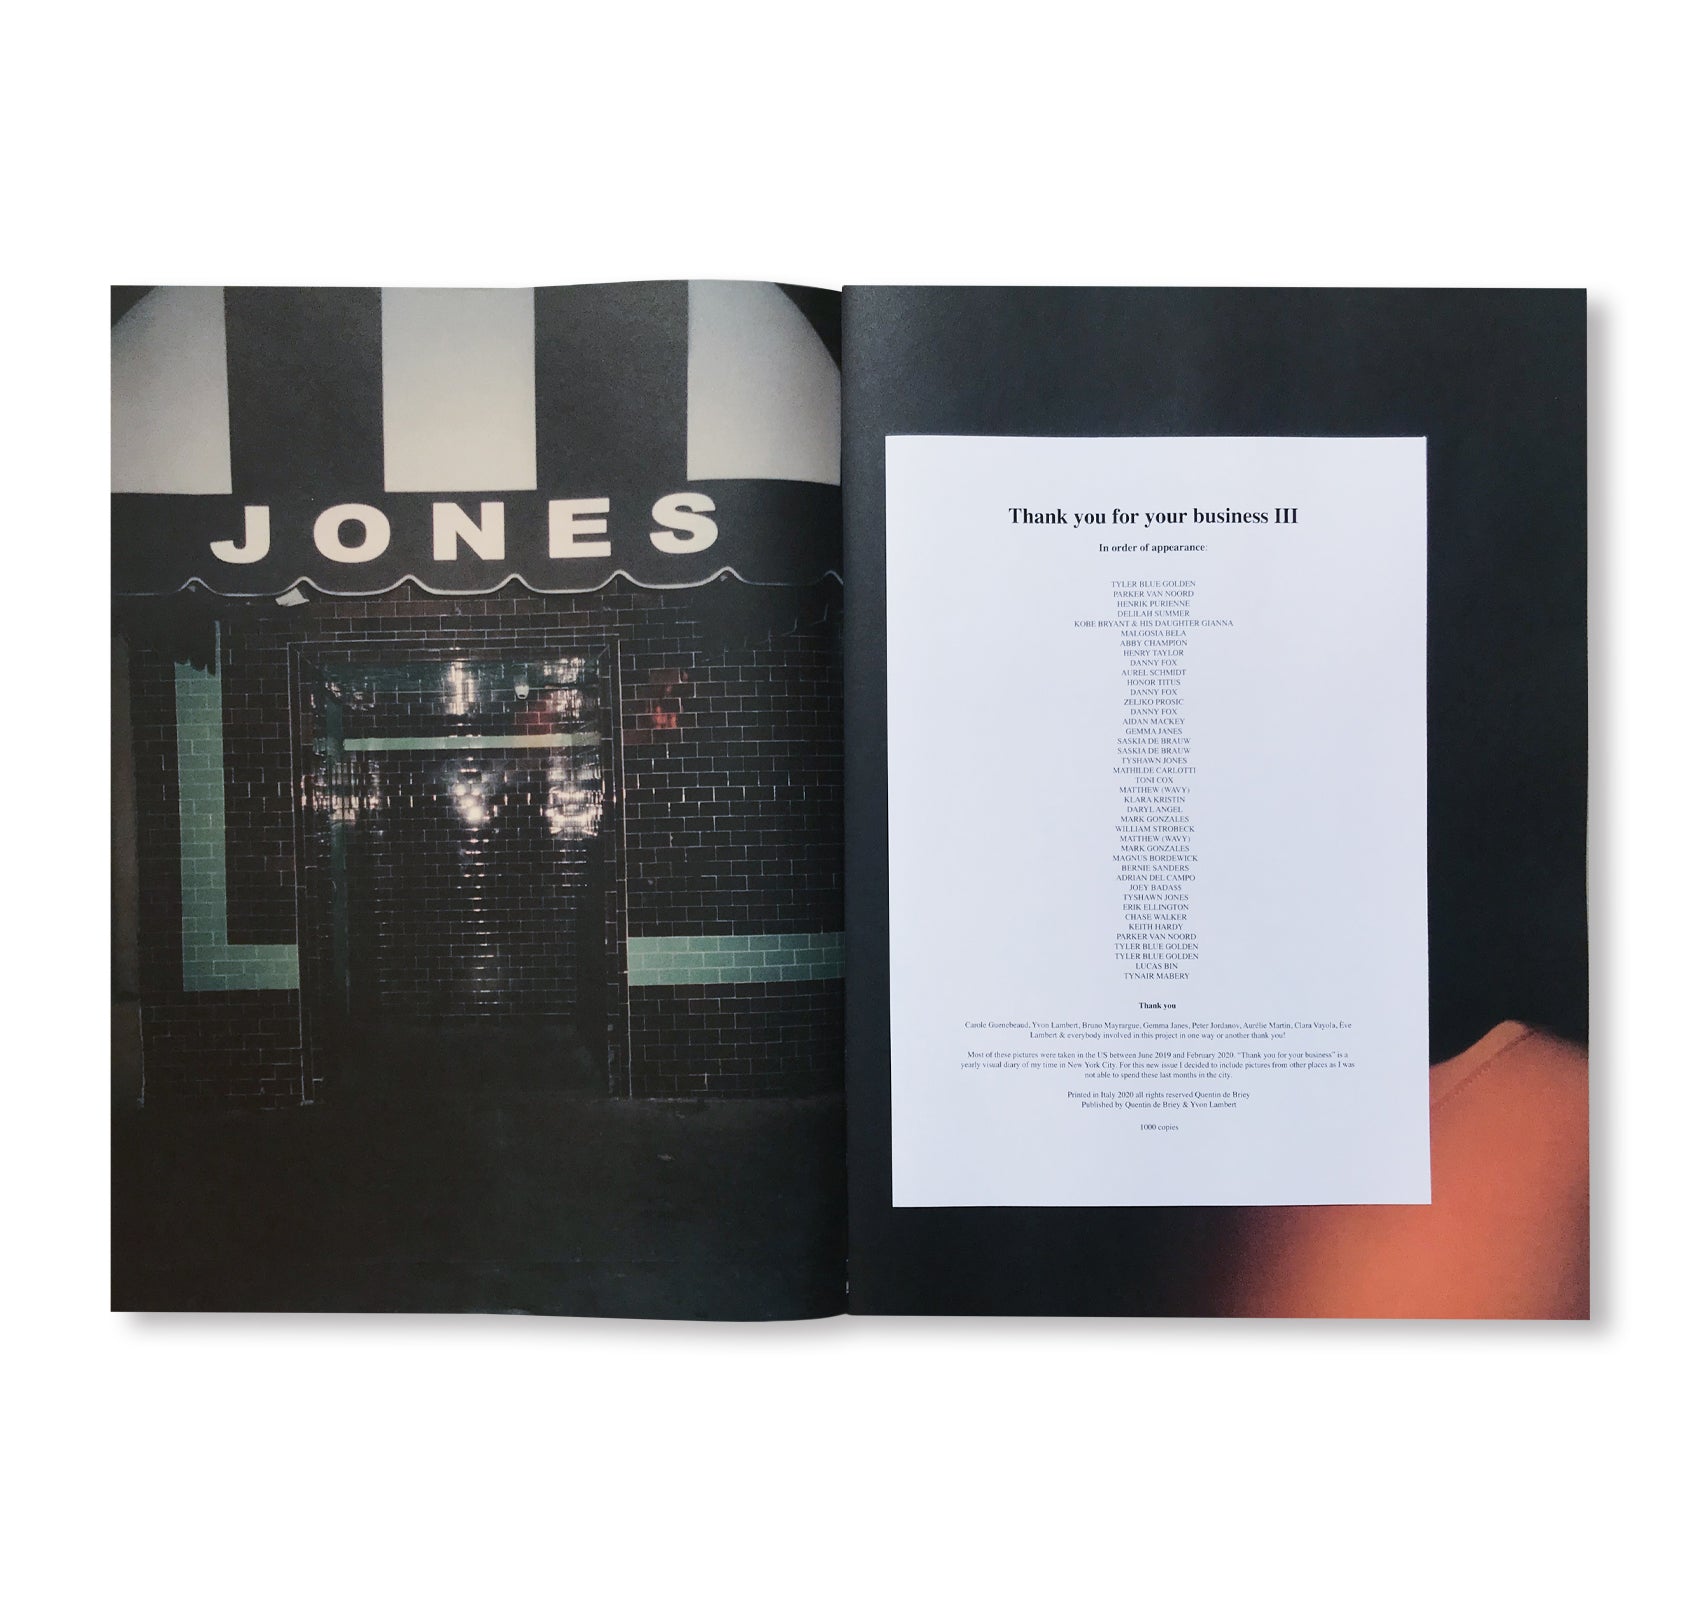 THANK YOU FOR YOUR BUSINESS Ⅲ by Quentin de Briey